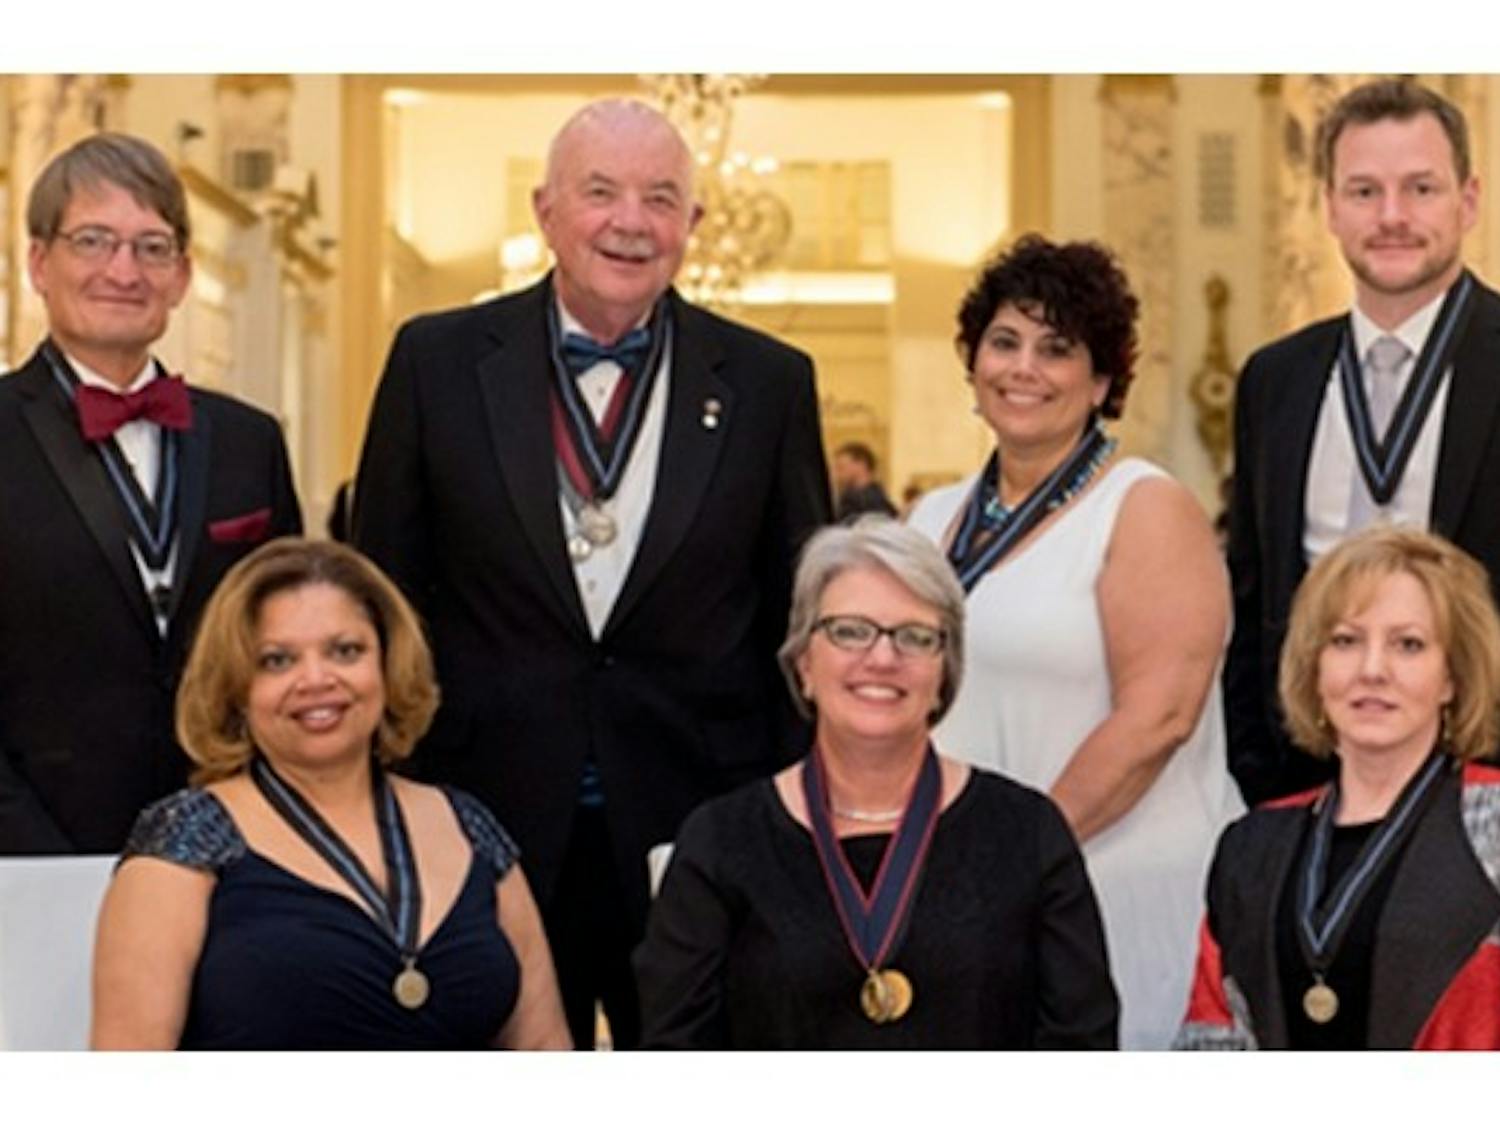 Bennett Receives President’s Medal for Distinguished Service from the National Council of Architectural Registration Board